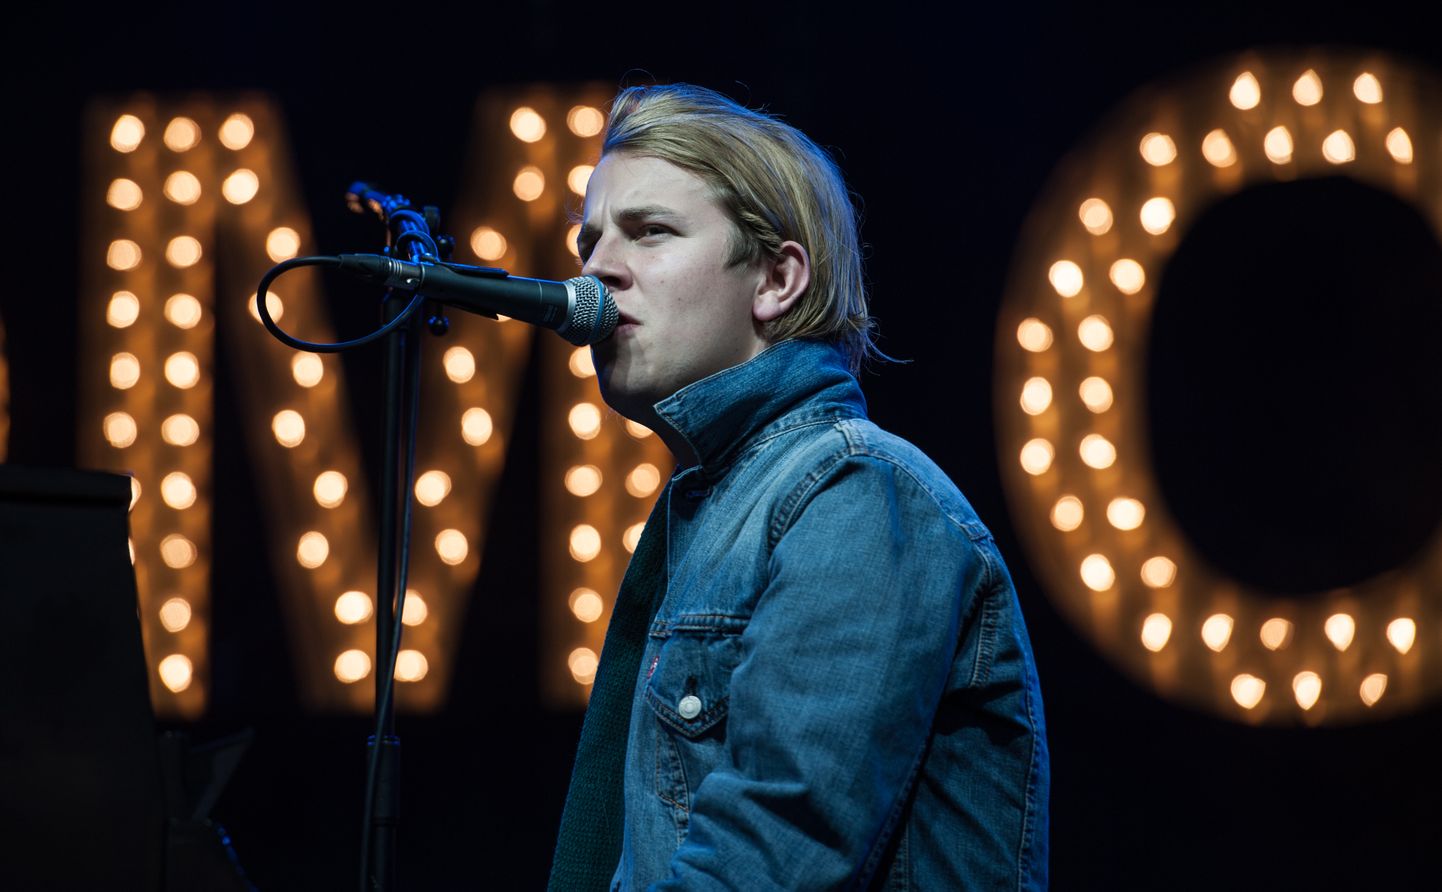 Tom Odell live on stage on day 2 at Festival No. 6 on 6th September 2014 at Portmeirion, Wales